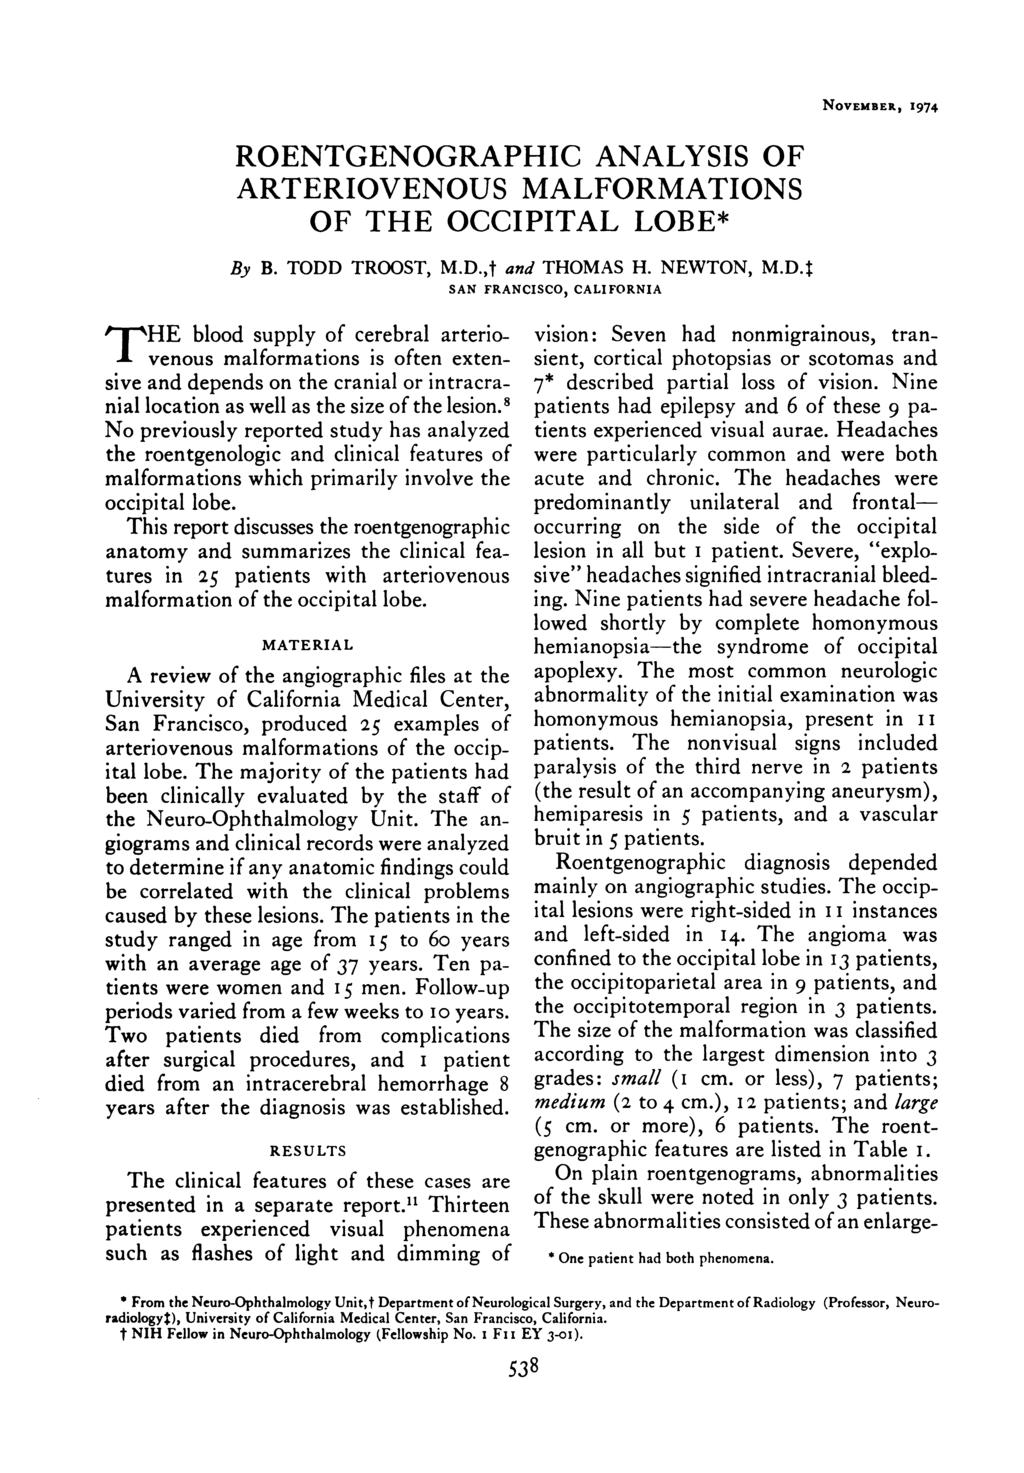 NOVEMBER, 1974 ROENTGENOGRAPHIC ANALYSIS OF ARTERIOVENOUS MALFORMATIONS OF THE OCCIPITAL LOBE* By B. TODD TROOST, M.D.,t and THOMAS H. NEWTON, M.